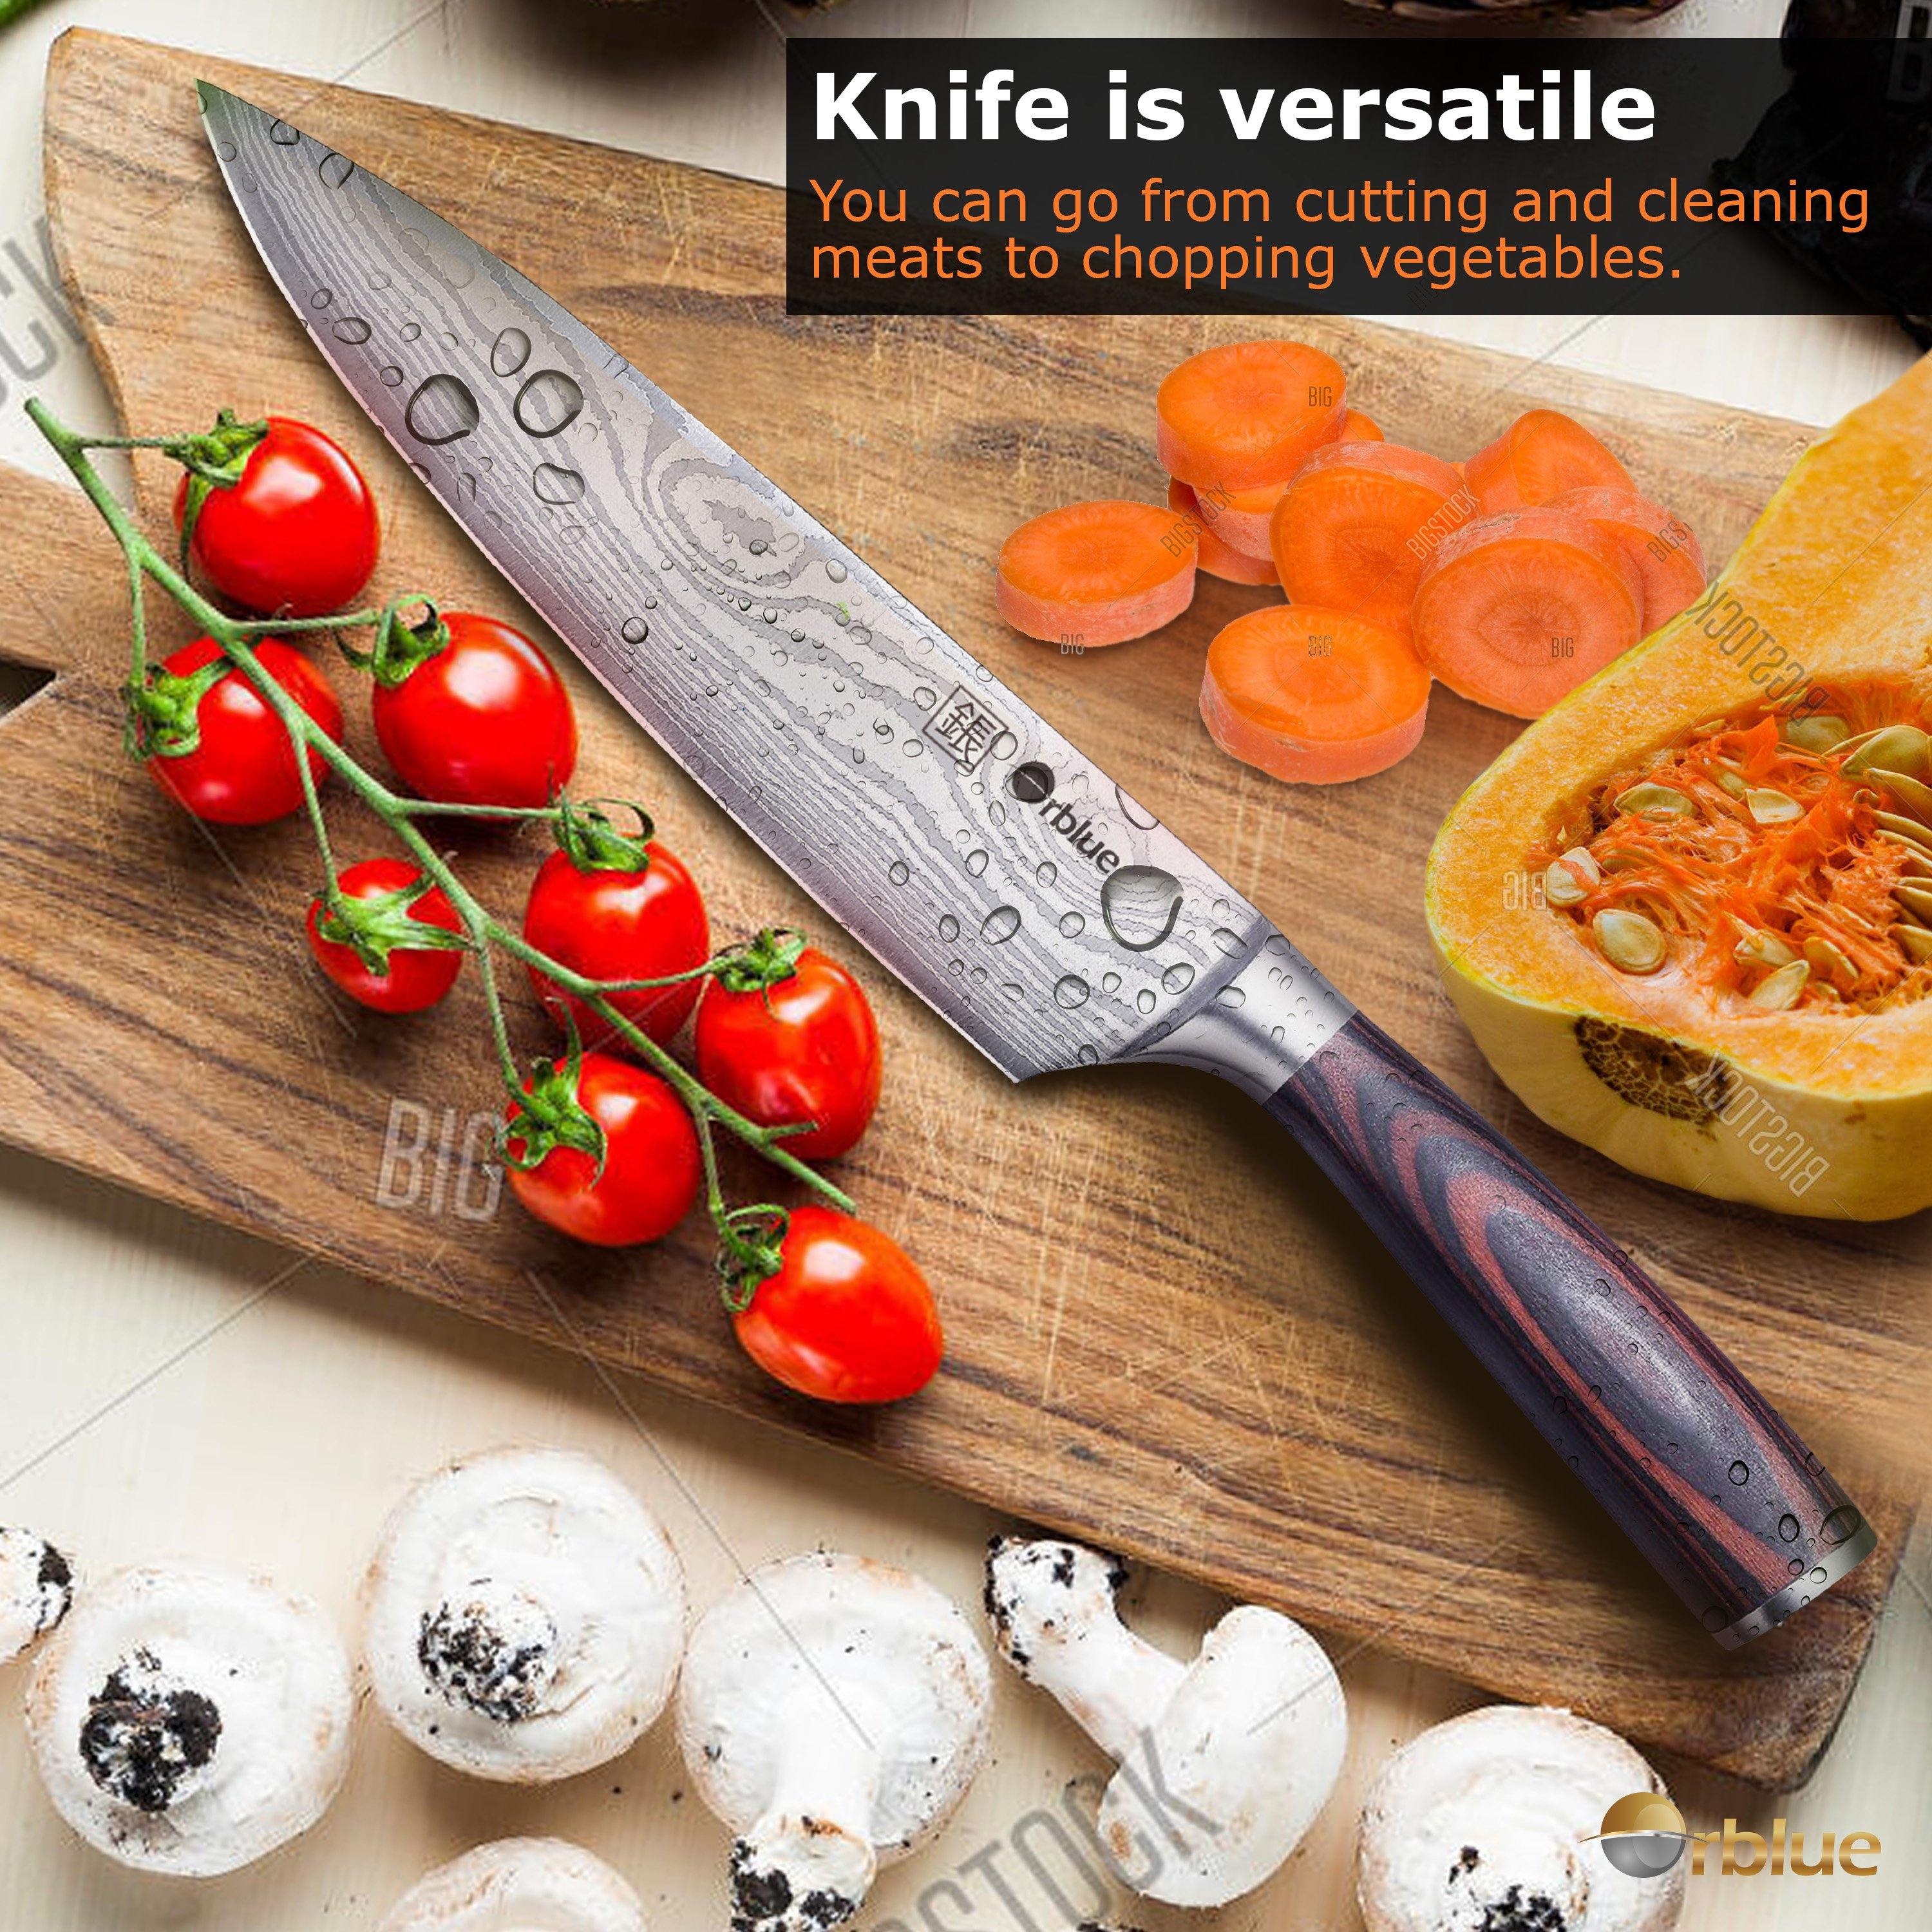 OOU! Professional Chef Knife 8 Inch Kitchen Knife, German High Carbon  Stainless Steel Super Sharp Chef's Knife With Ergonomic Solid Wood Handle  and